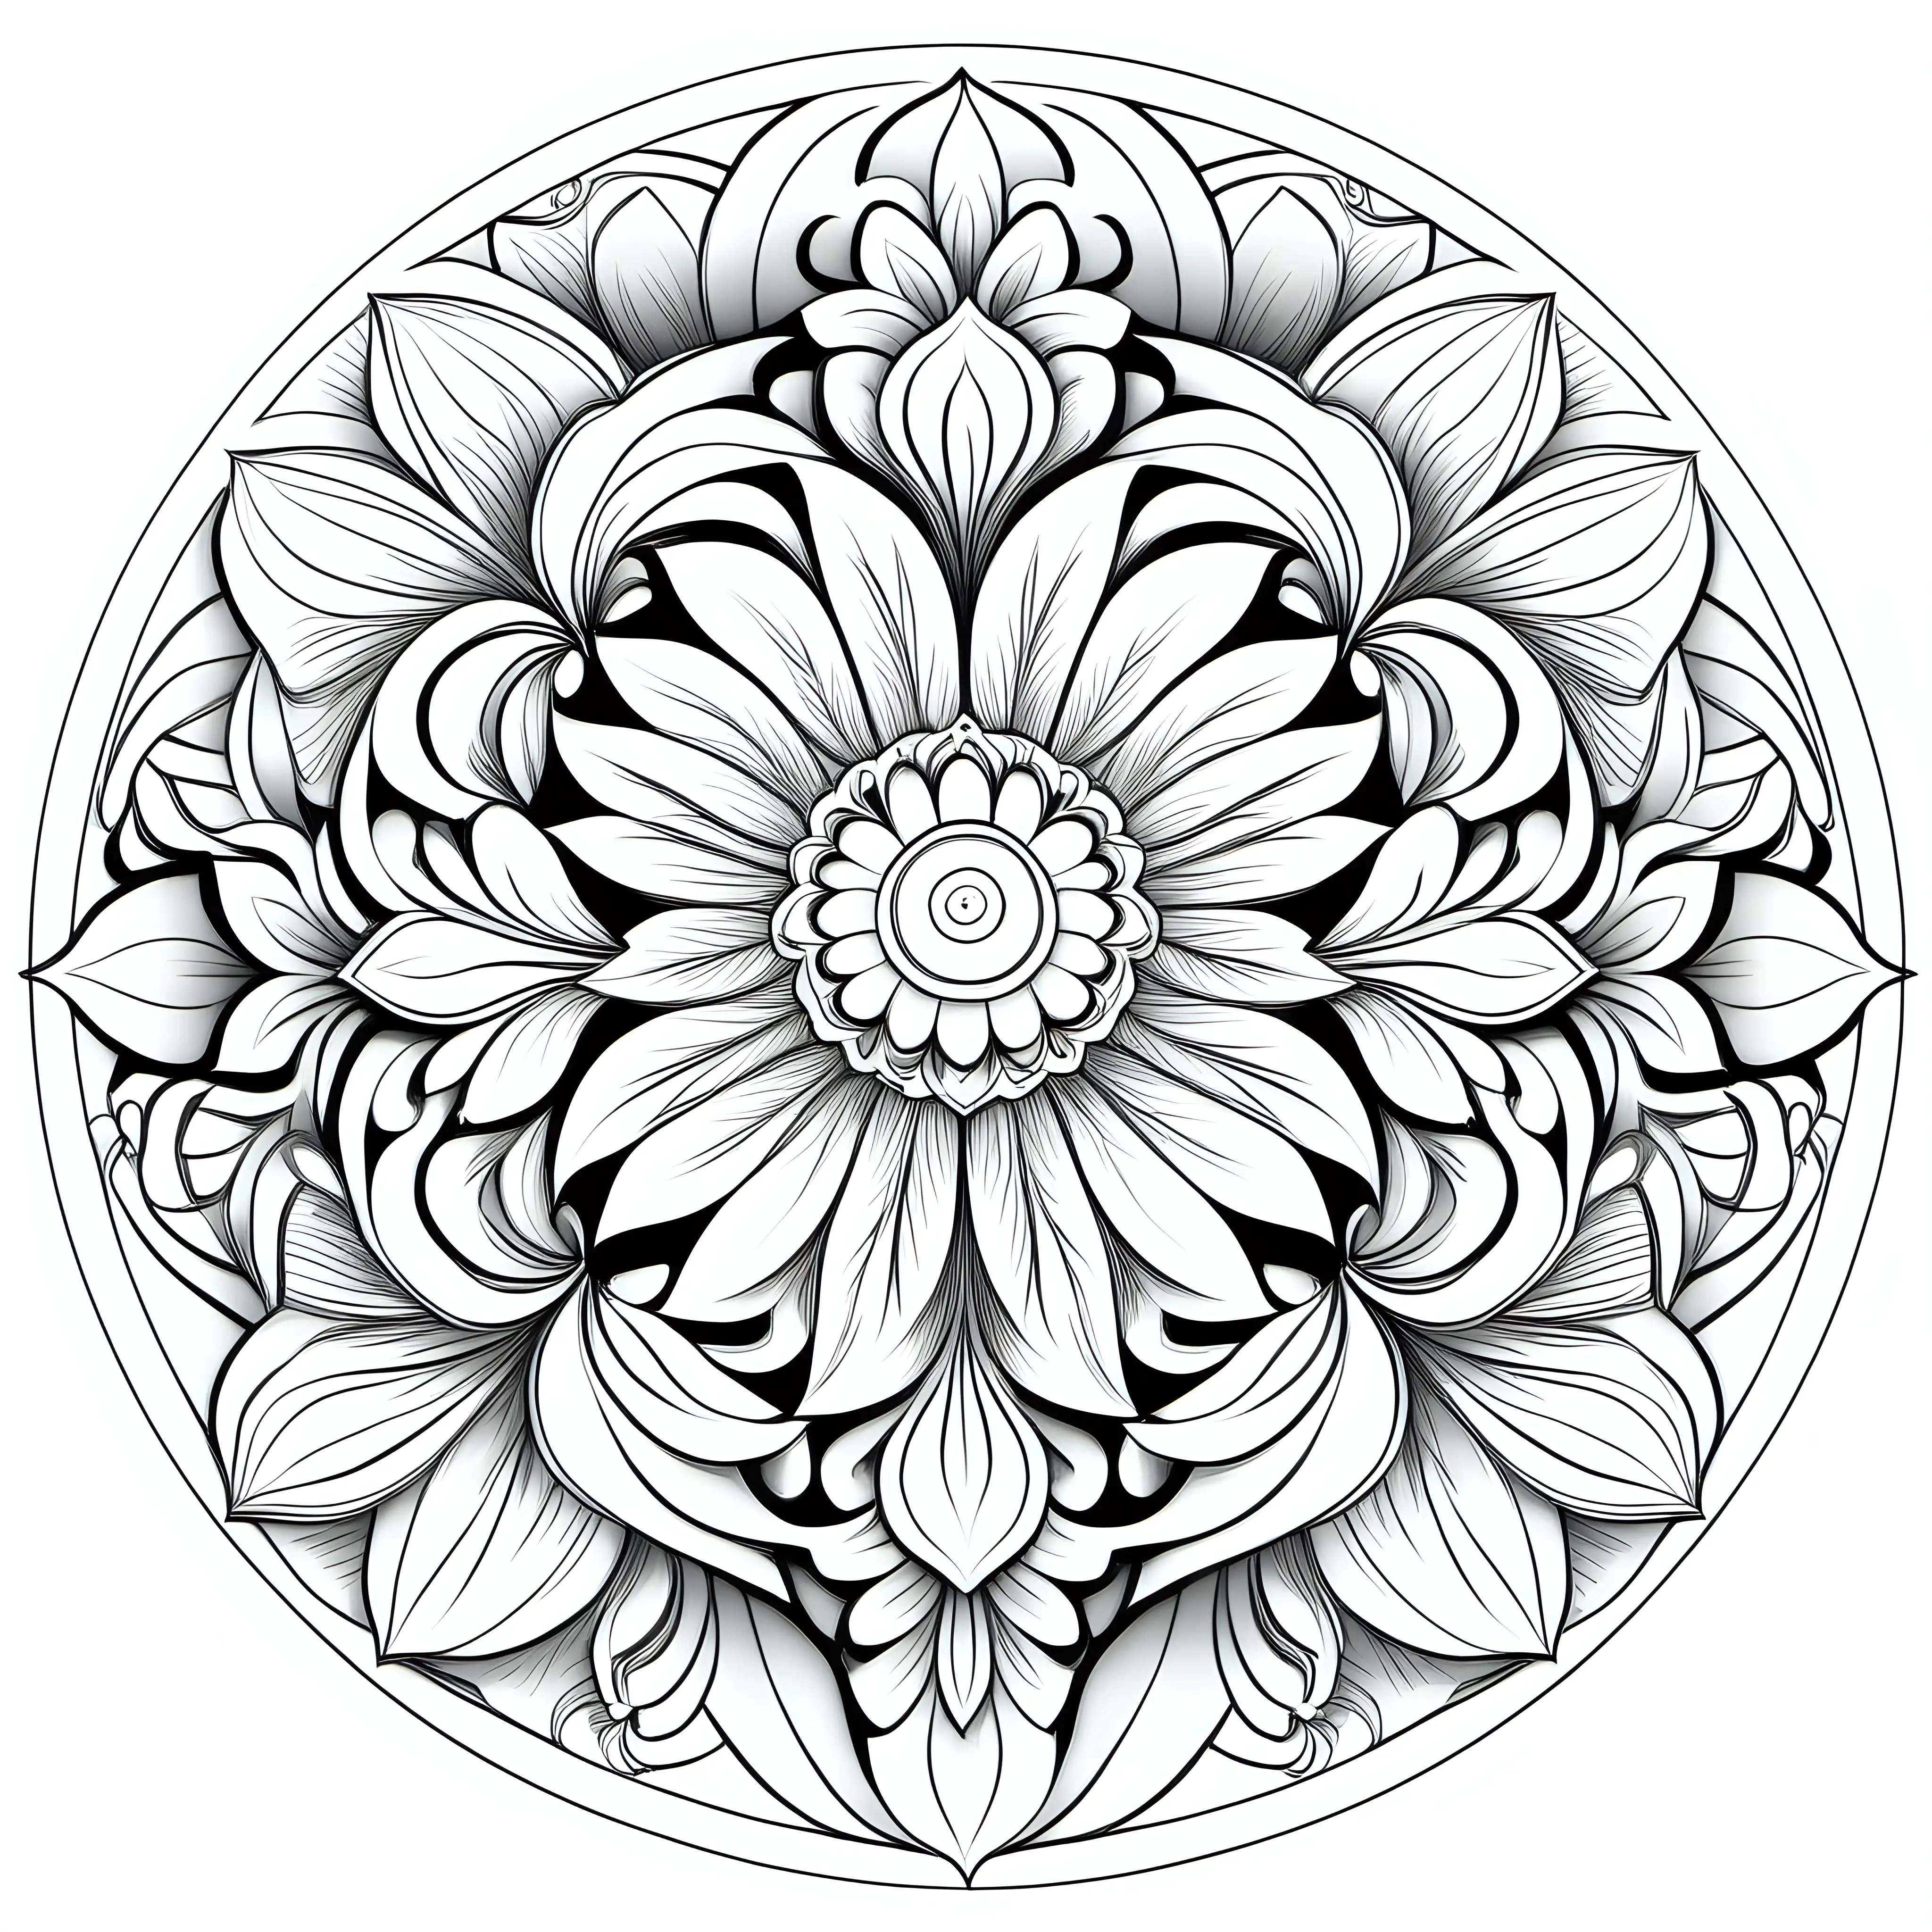 Floral Mandala Coloring Design with Intricate Symmetry